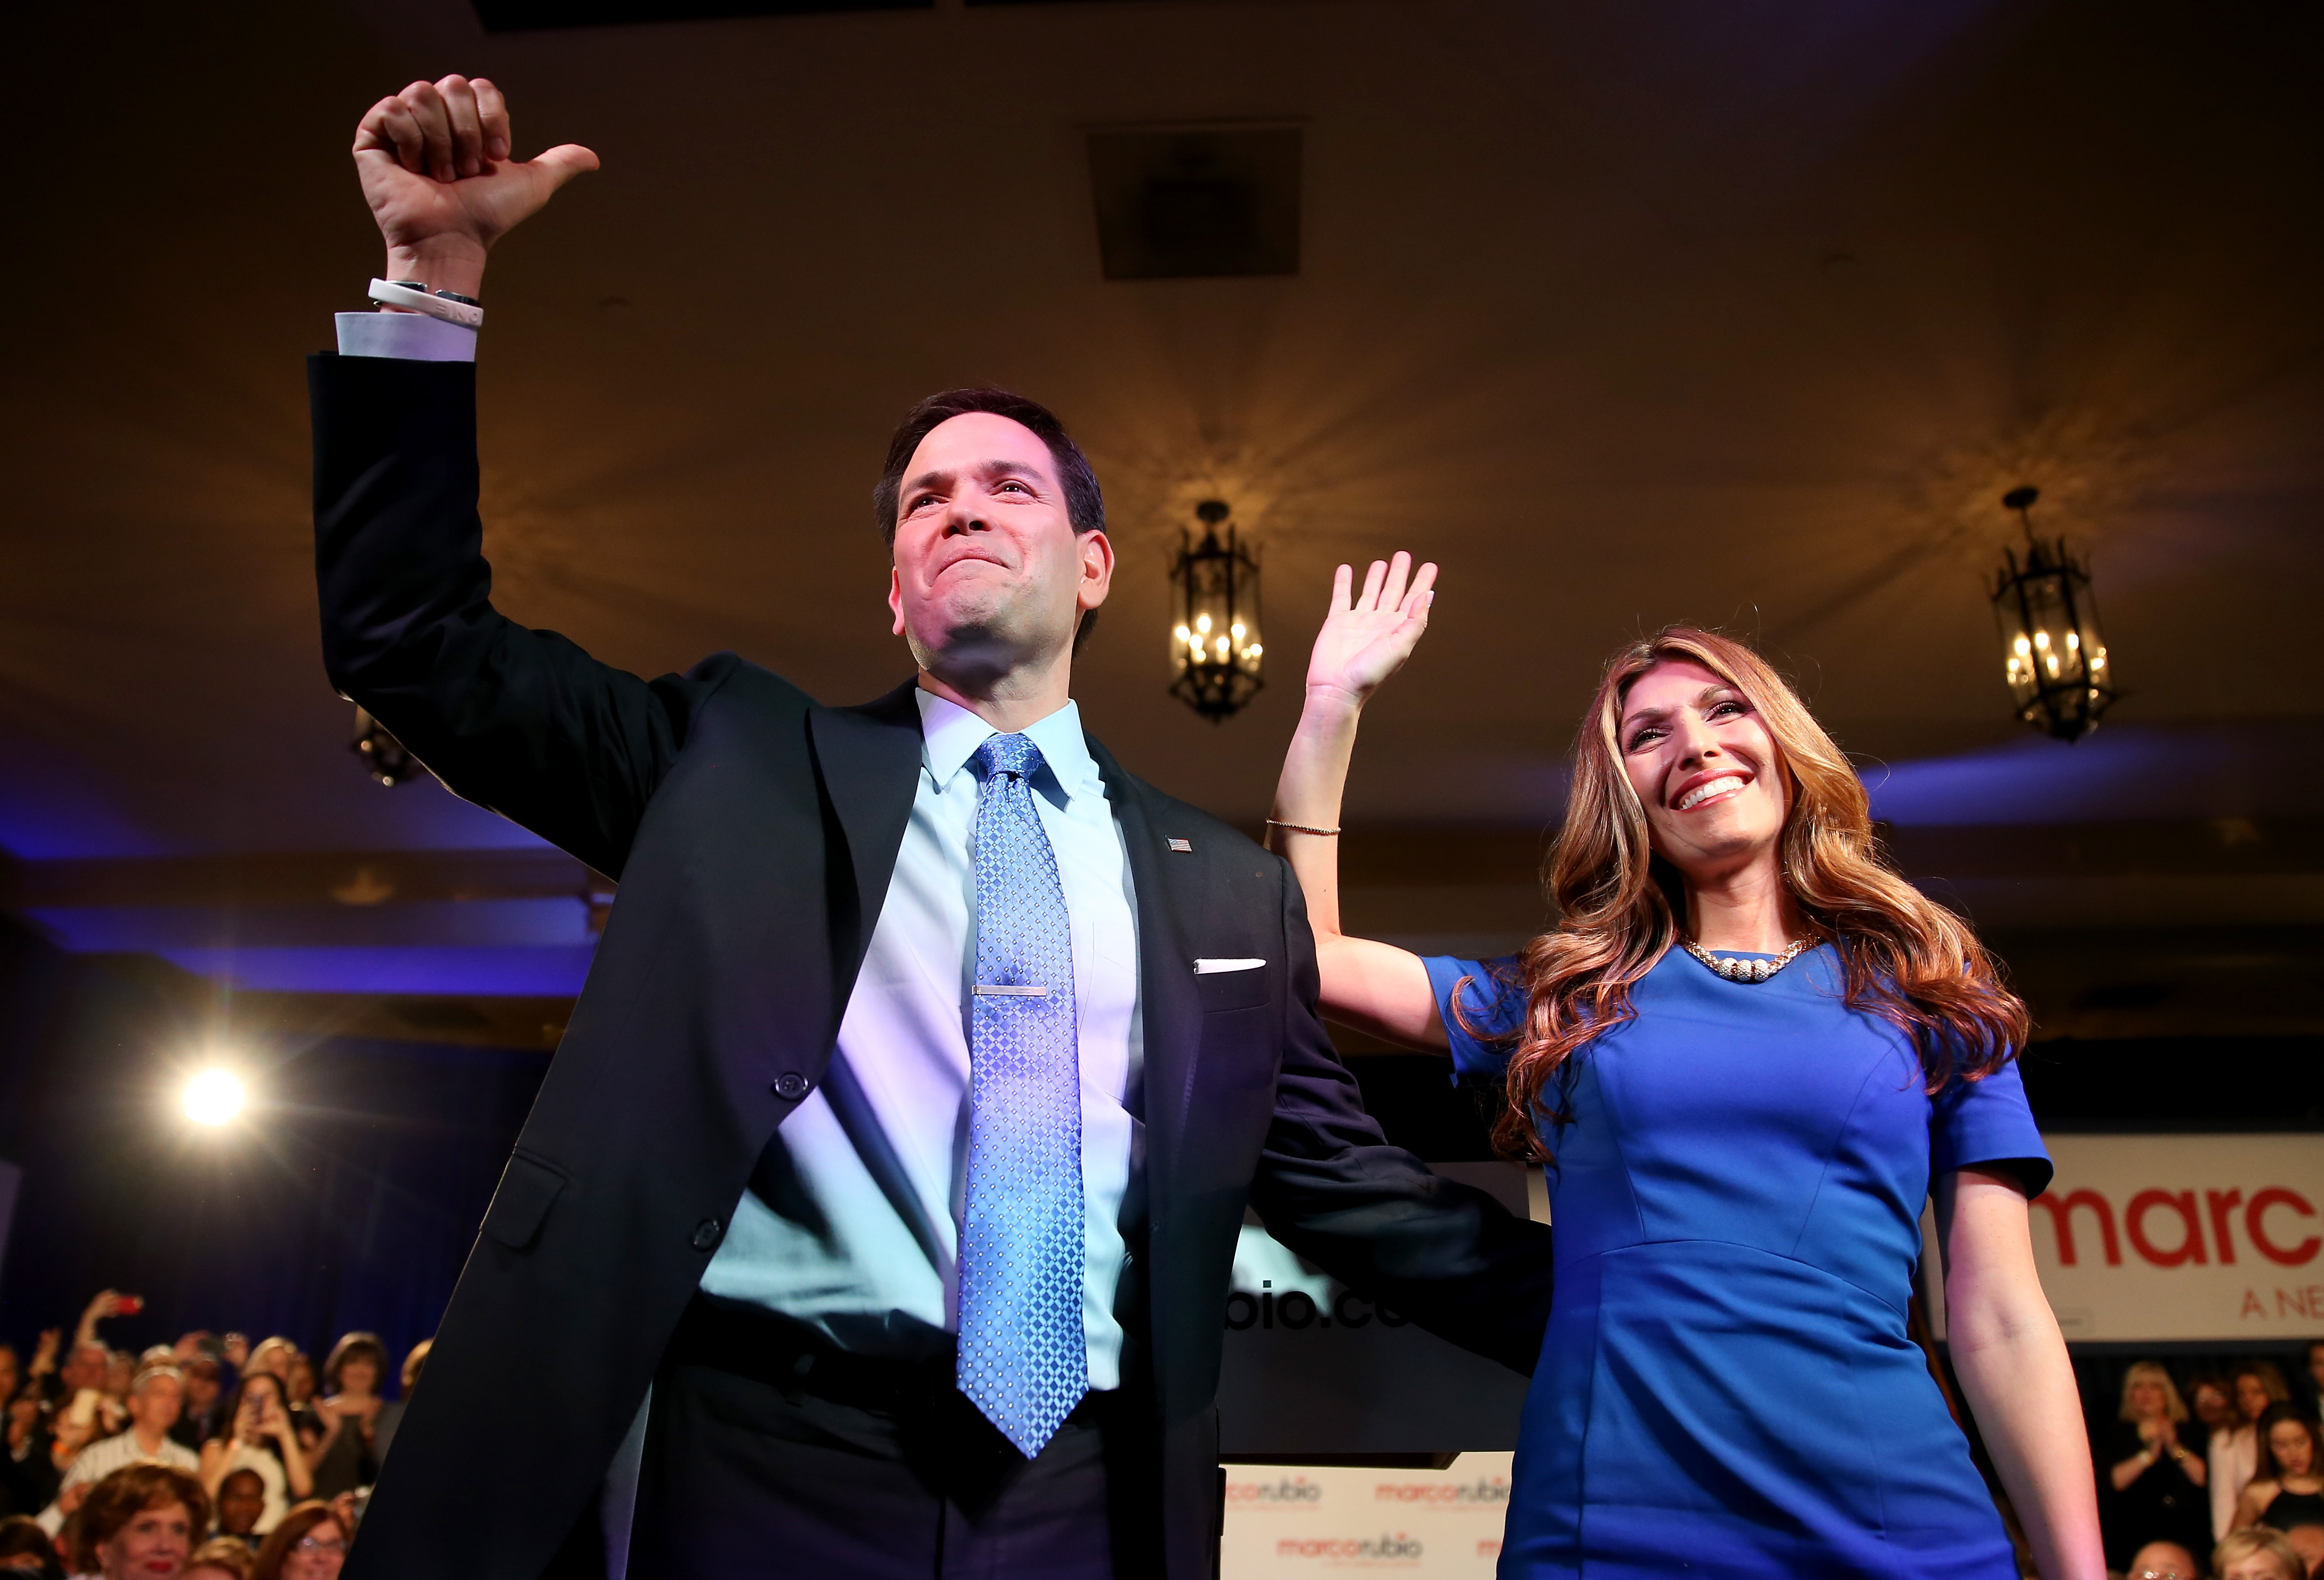 Marco Rubio and Jeanette Rubio on April 13, 2015 in Miami, Florida. (Joe Raedle&mdash;2015 Getty Images)